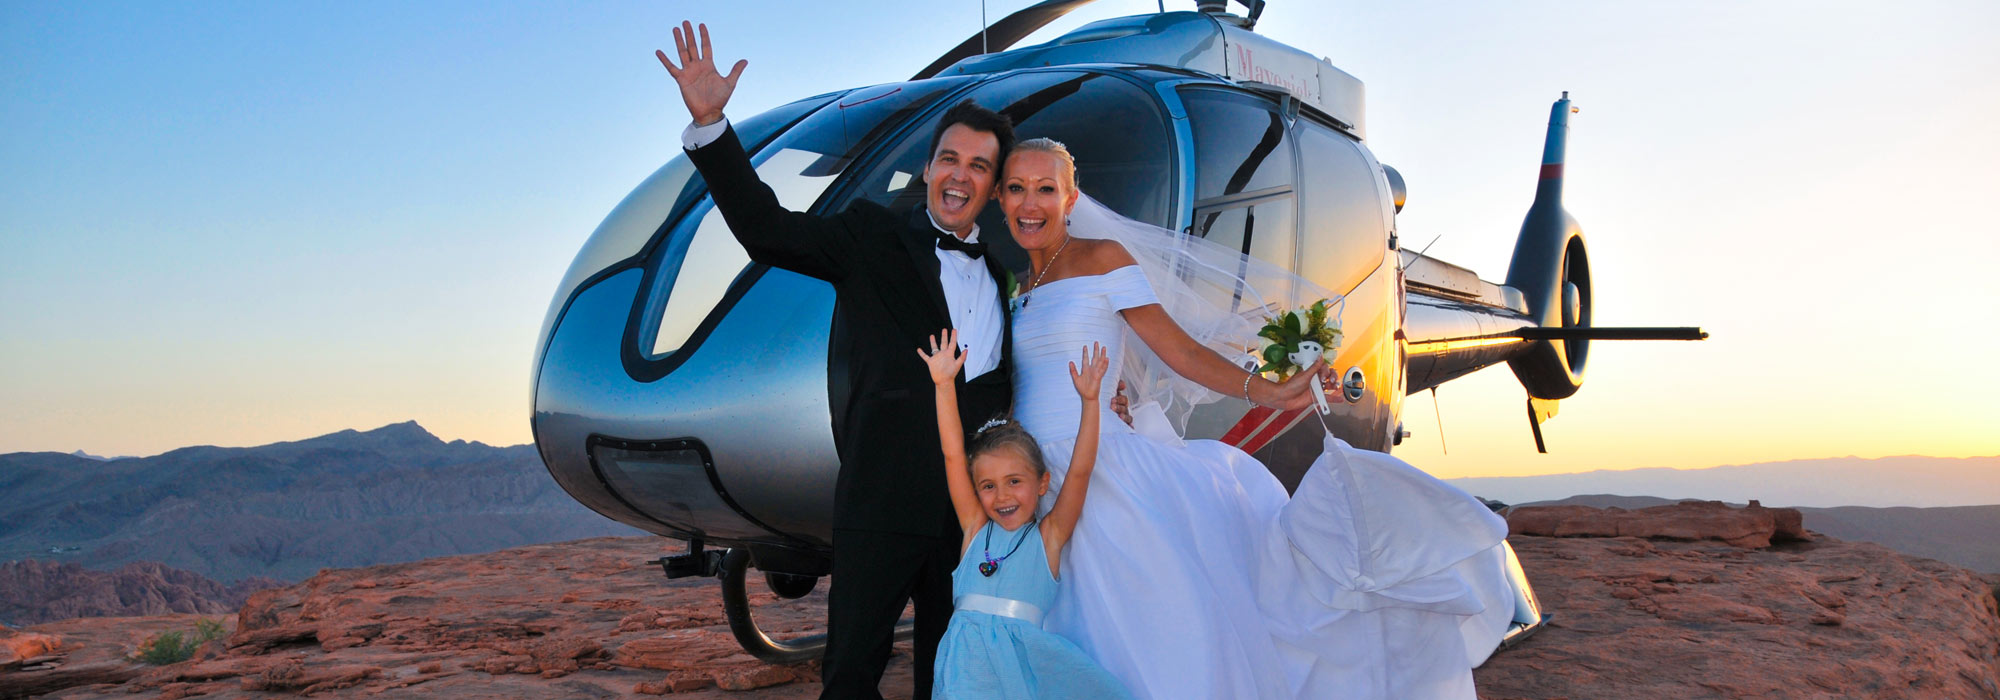 Helicopter Weddings & Proposals